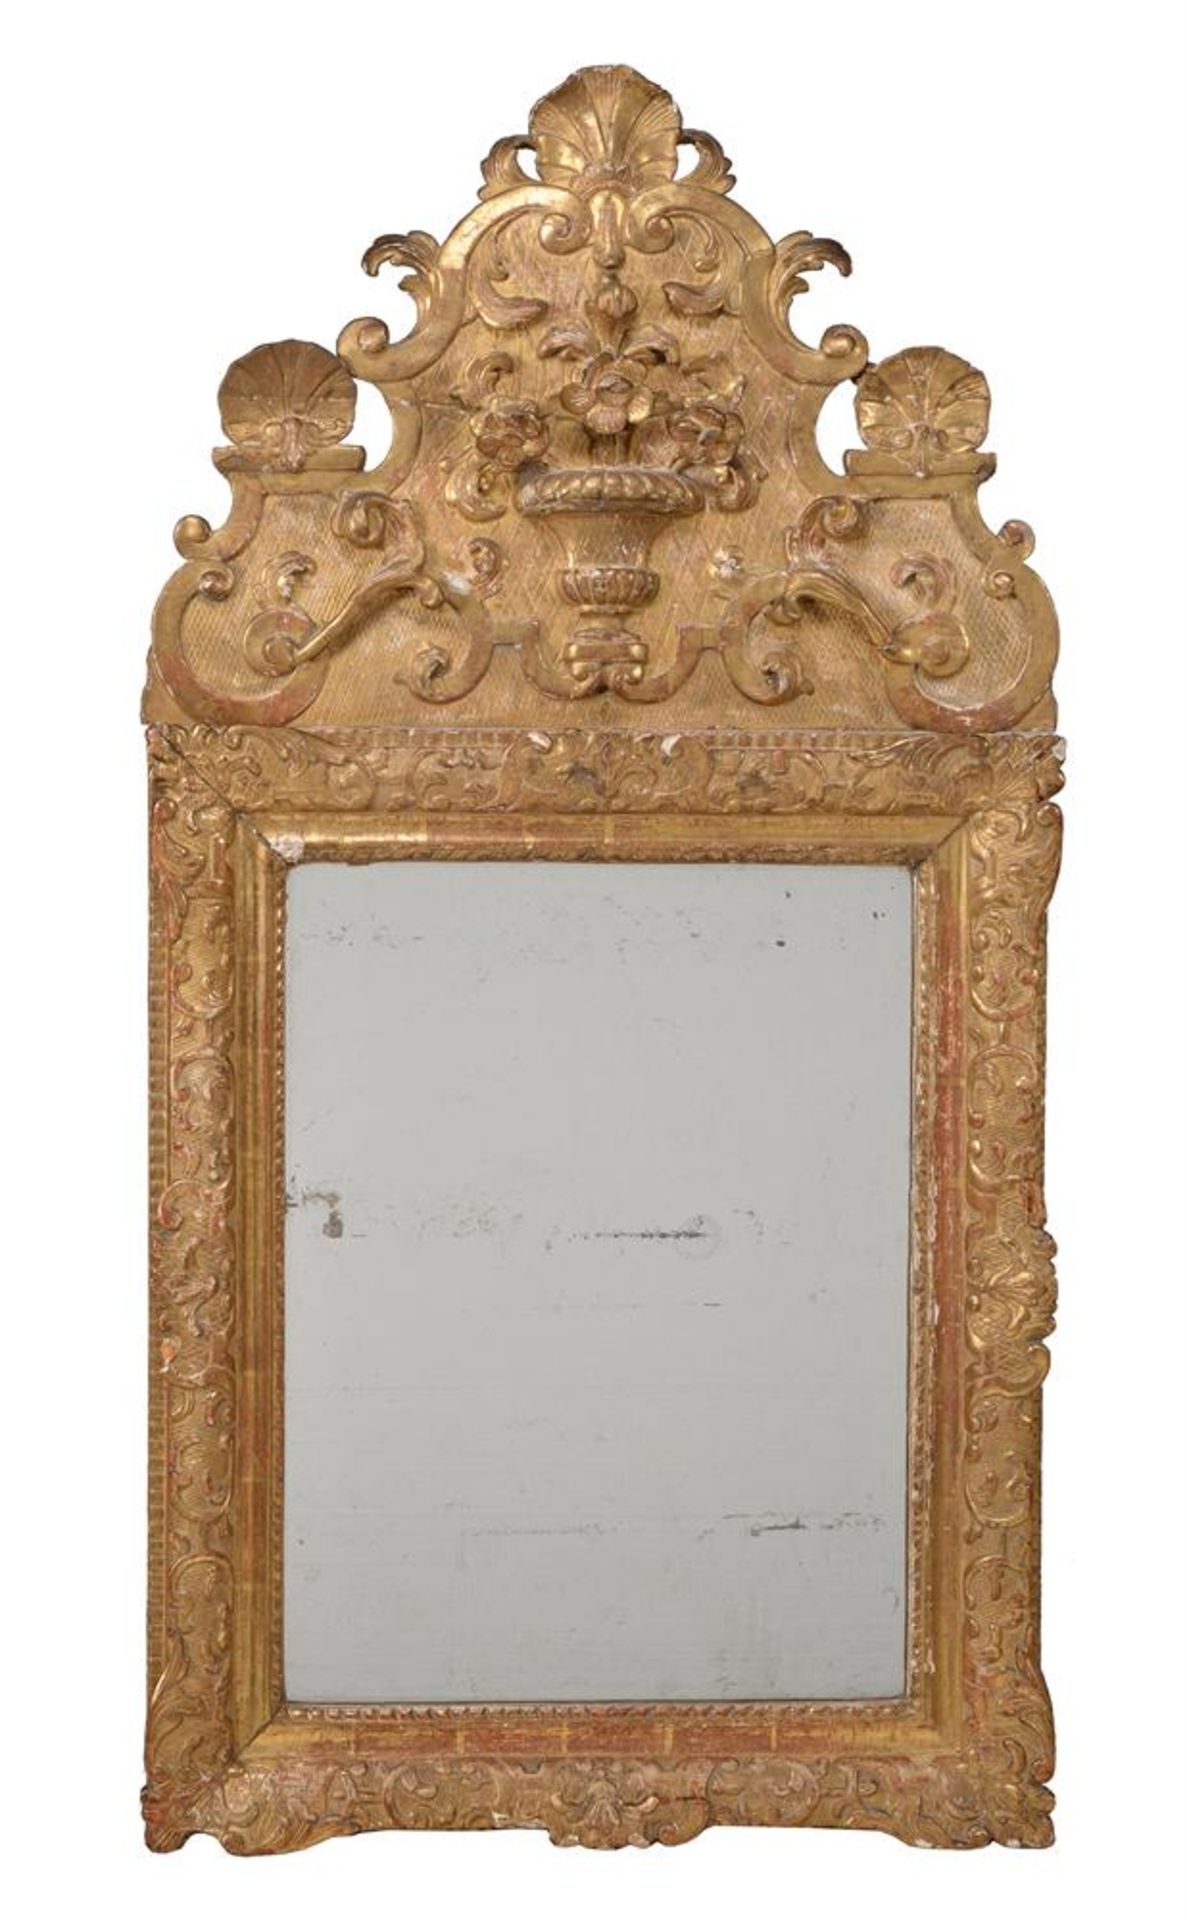 A FRENCH CARVED GILTWOOD MIRROR, 18TH CENTURY